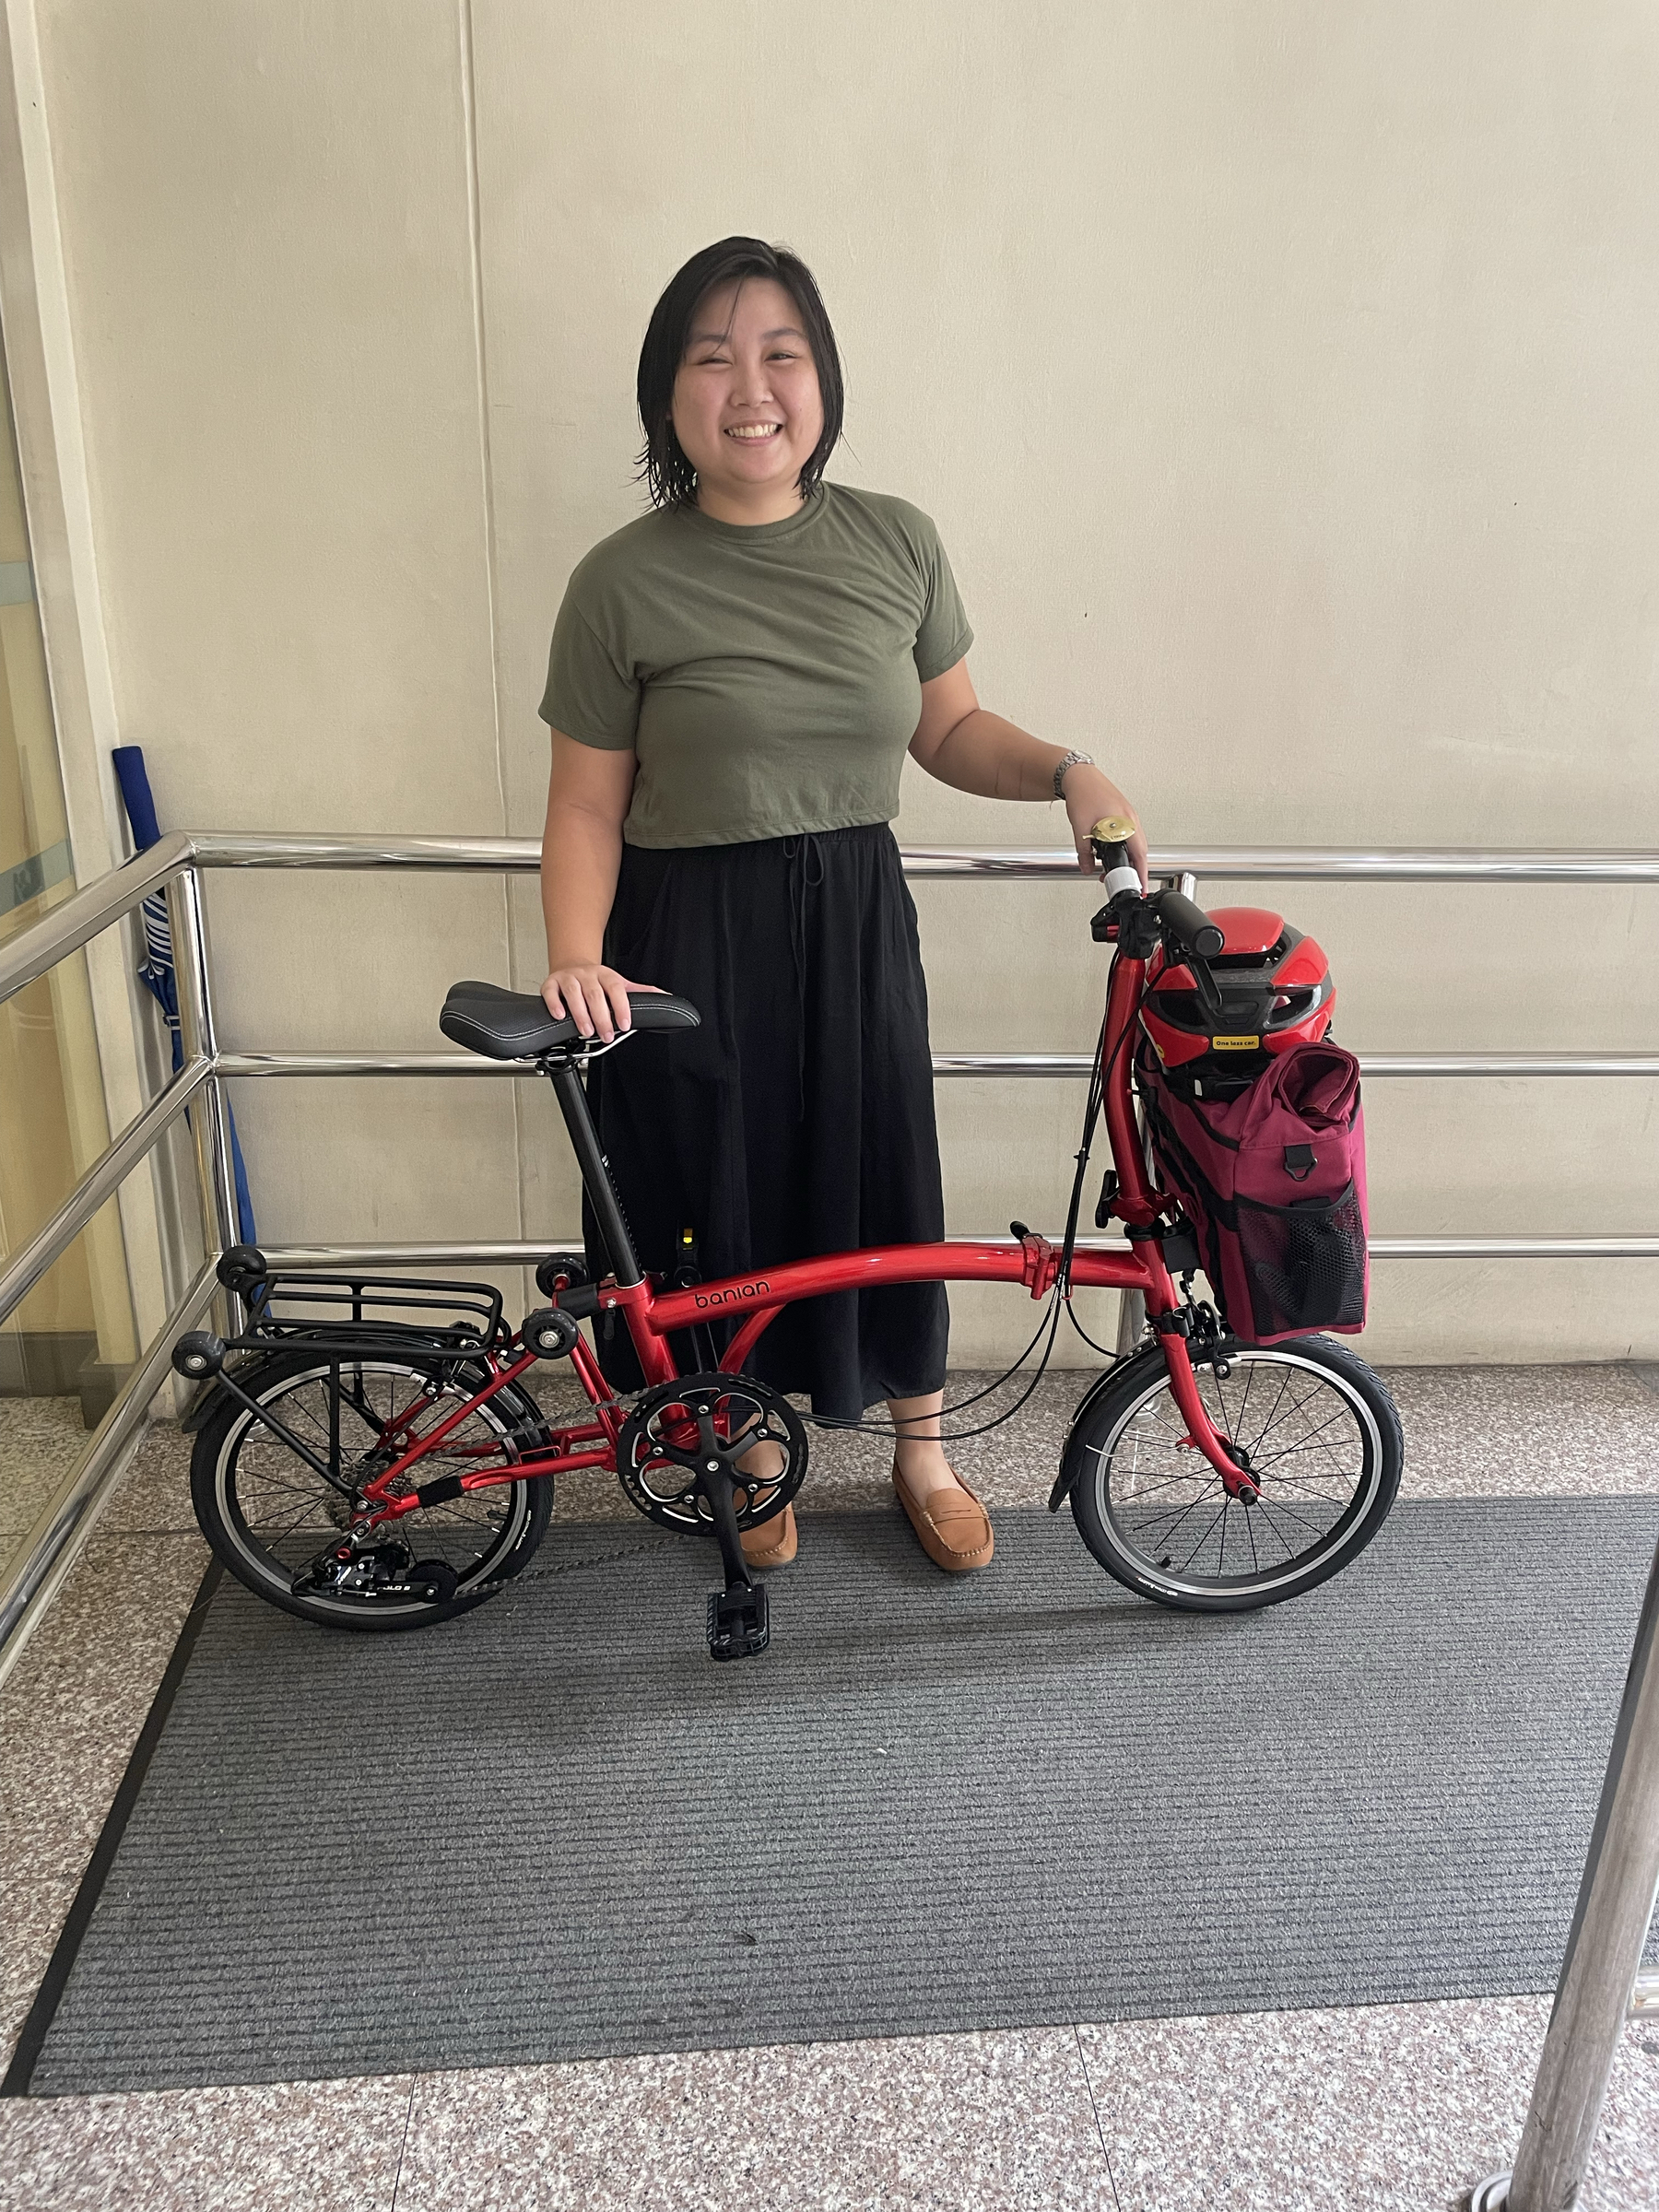 photo of Chi with her red trifold bike, showing her outfit and her bike commute setup